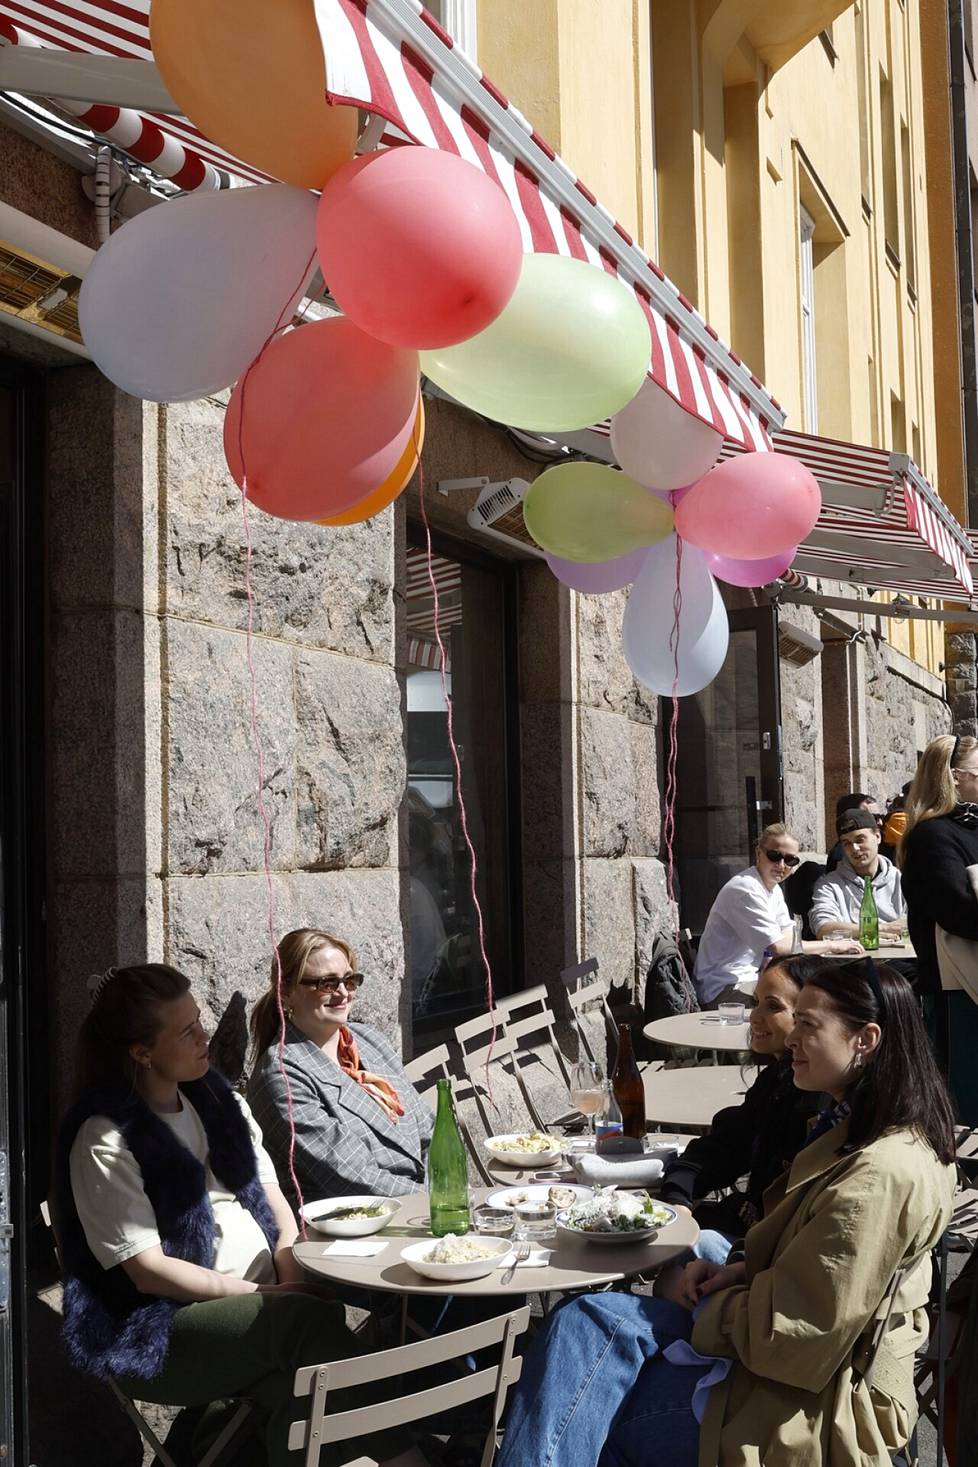 Ina Helkala (left), Elina Riihimäki, Anni Minkkinen and Katariina Kemppainen celebrated May Day with lunch on Way Bakery's terrace.  The friends, who had known each other for twenty years, planned to enjoy donuts and sparkling wine in Käpylä next.